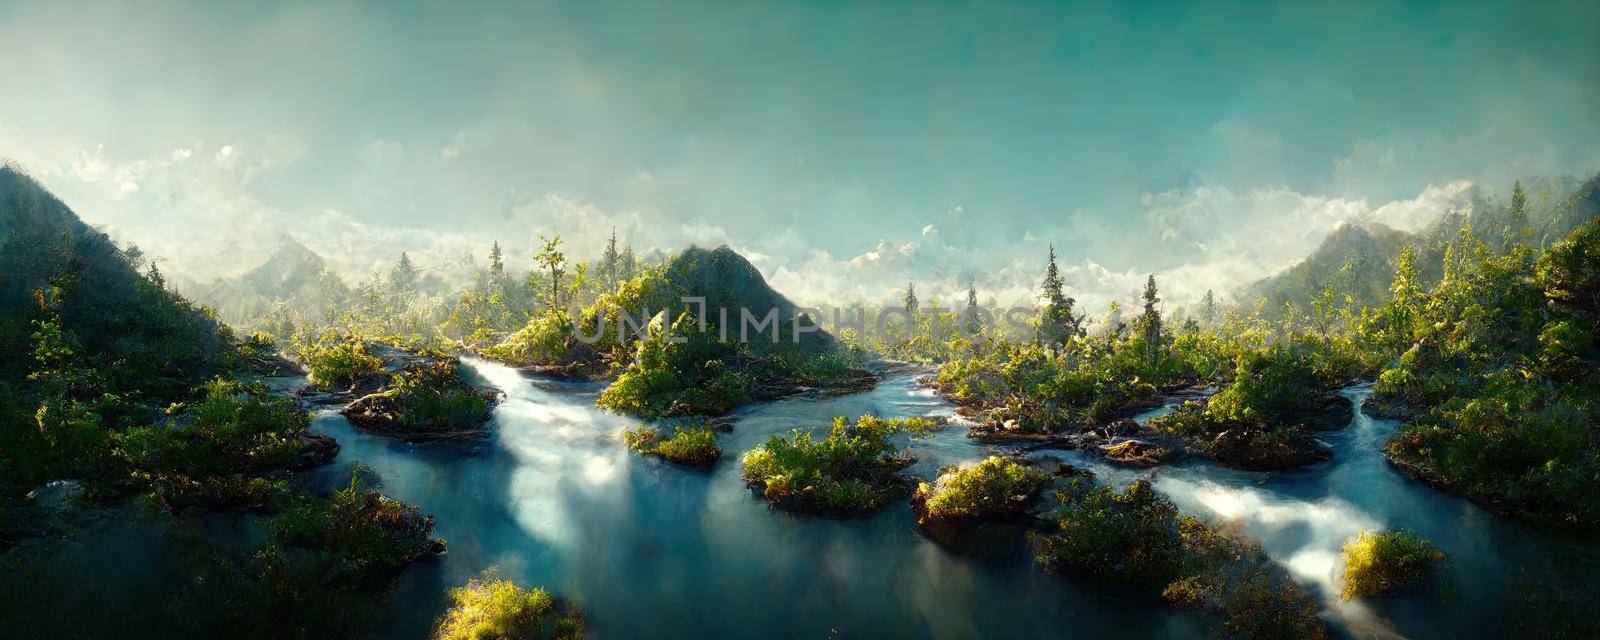 fantastic fabulous landscape of mountains and rivers flowing between them by TRMK